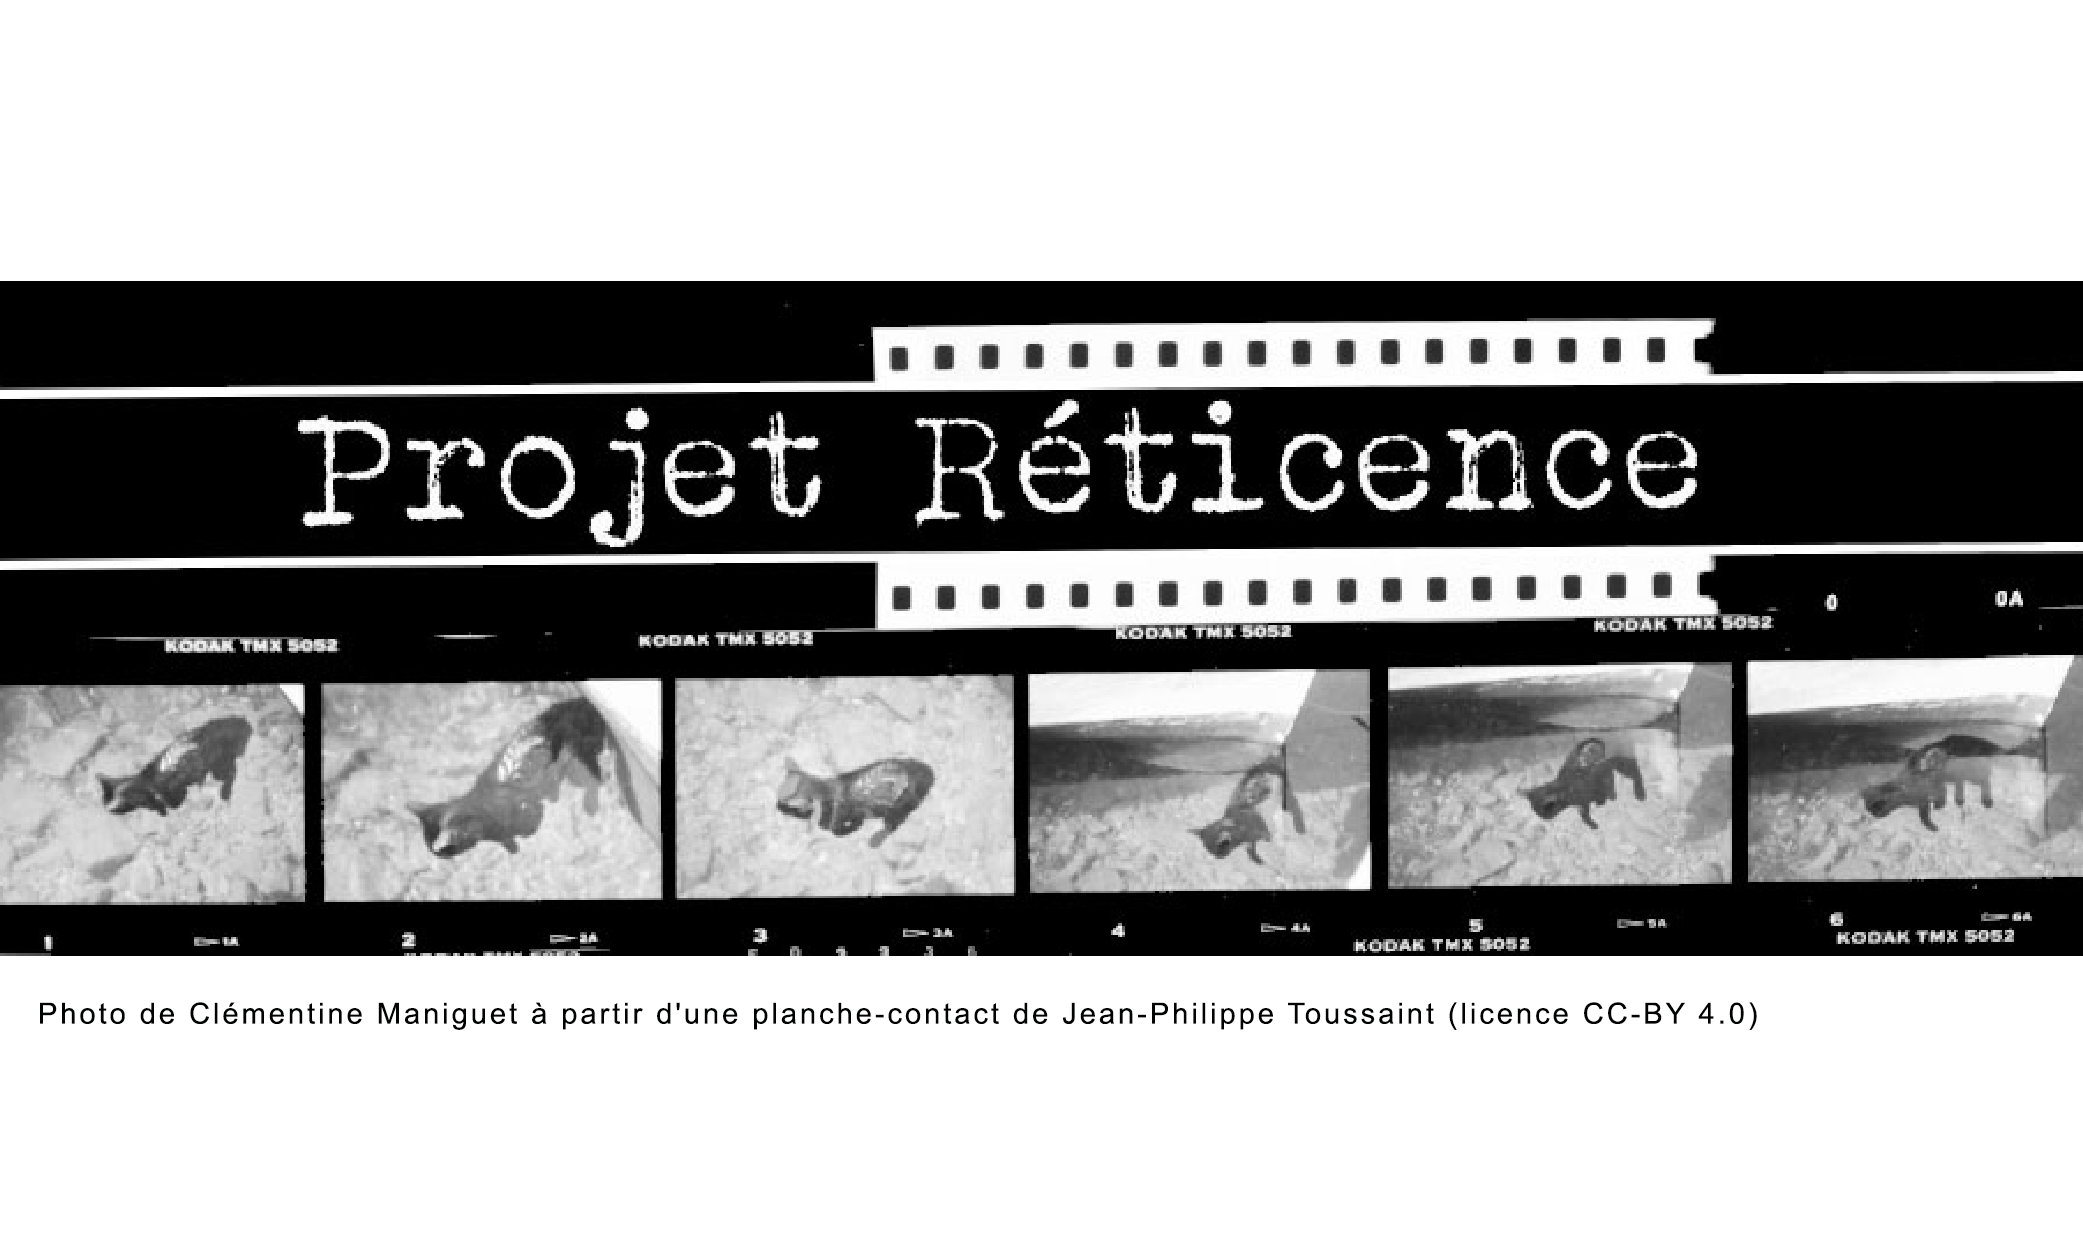 The XML-TEI transcriptions of the drafts of the novel La Réticence by Jean-Philippe Toussaint